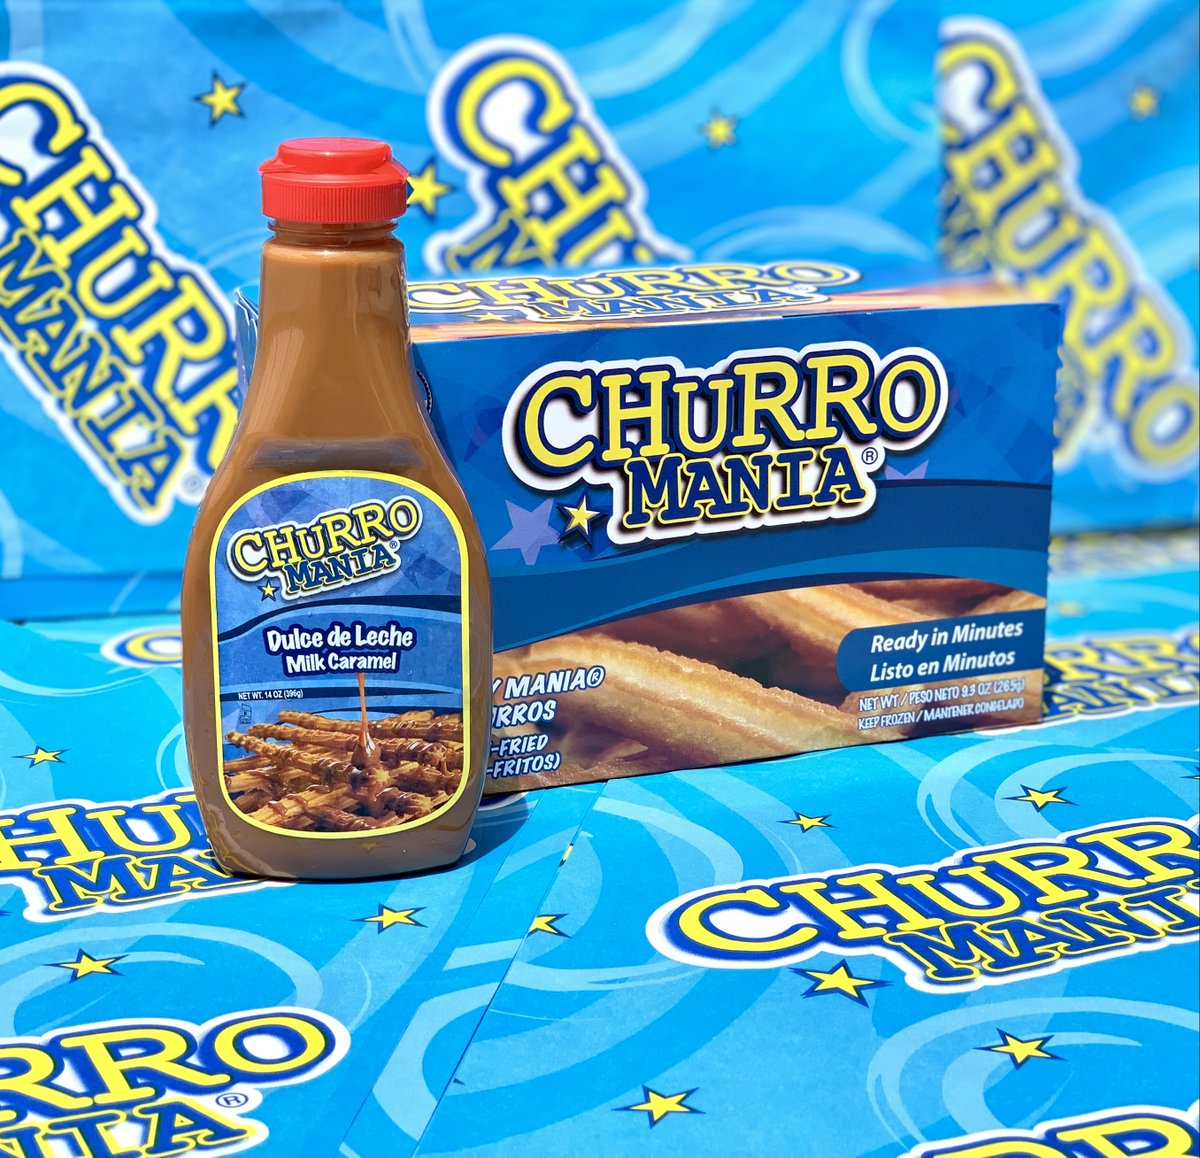 Evening cravings? Our Crispymania churros are perfect for a sweet end to your day! Available at @publix, @bjswholesale, and @MilamsMarket. #Churromania